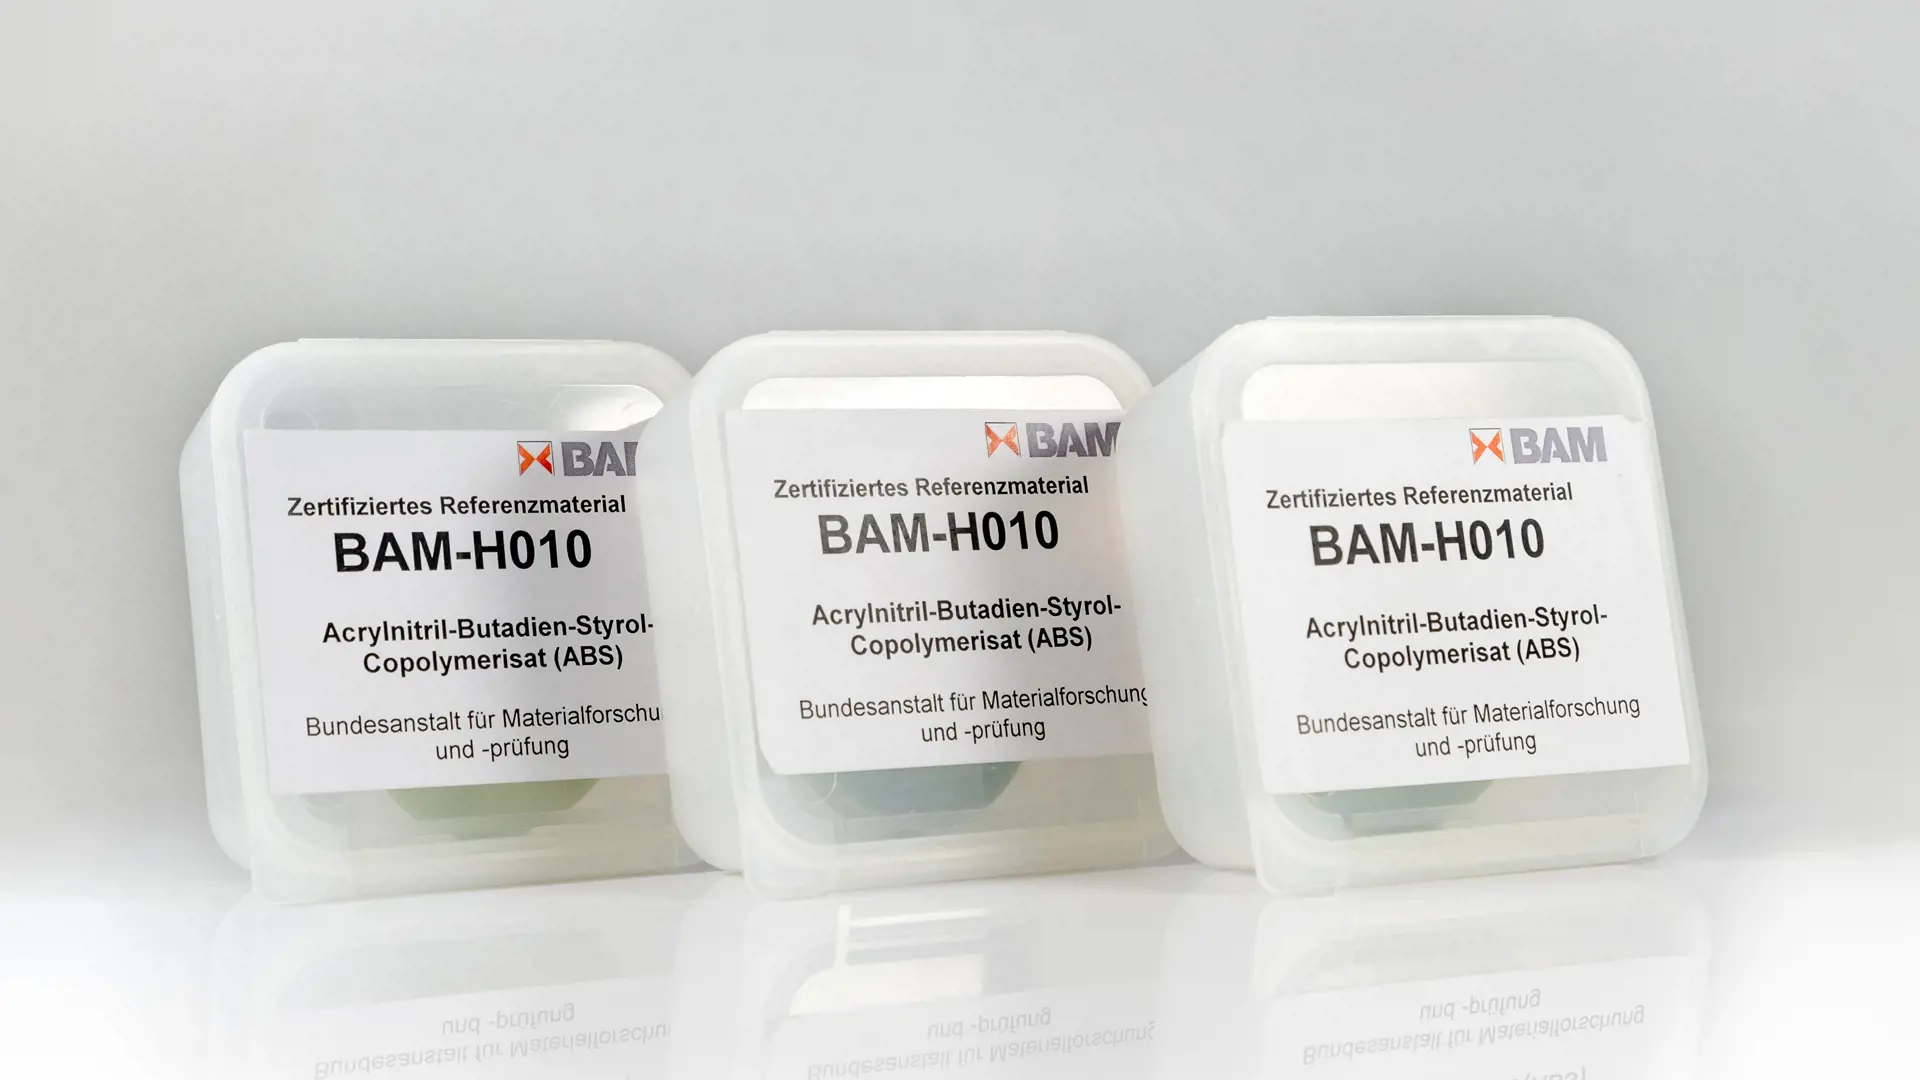 3 packages of BAM-H010 certified reference material, acrylnitril-butadien-styrol-copolymerisat (ABS)